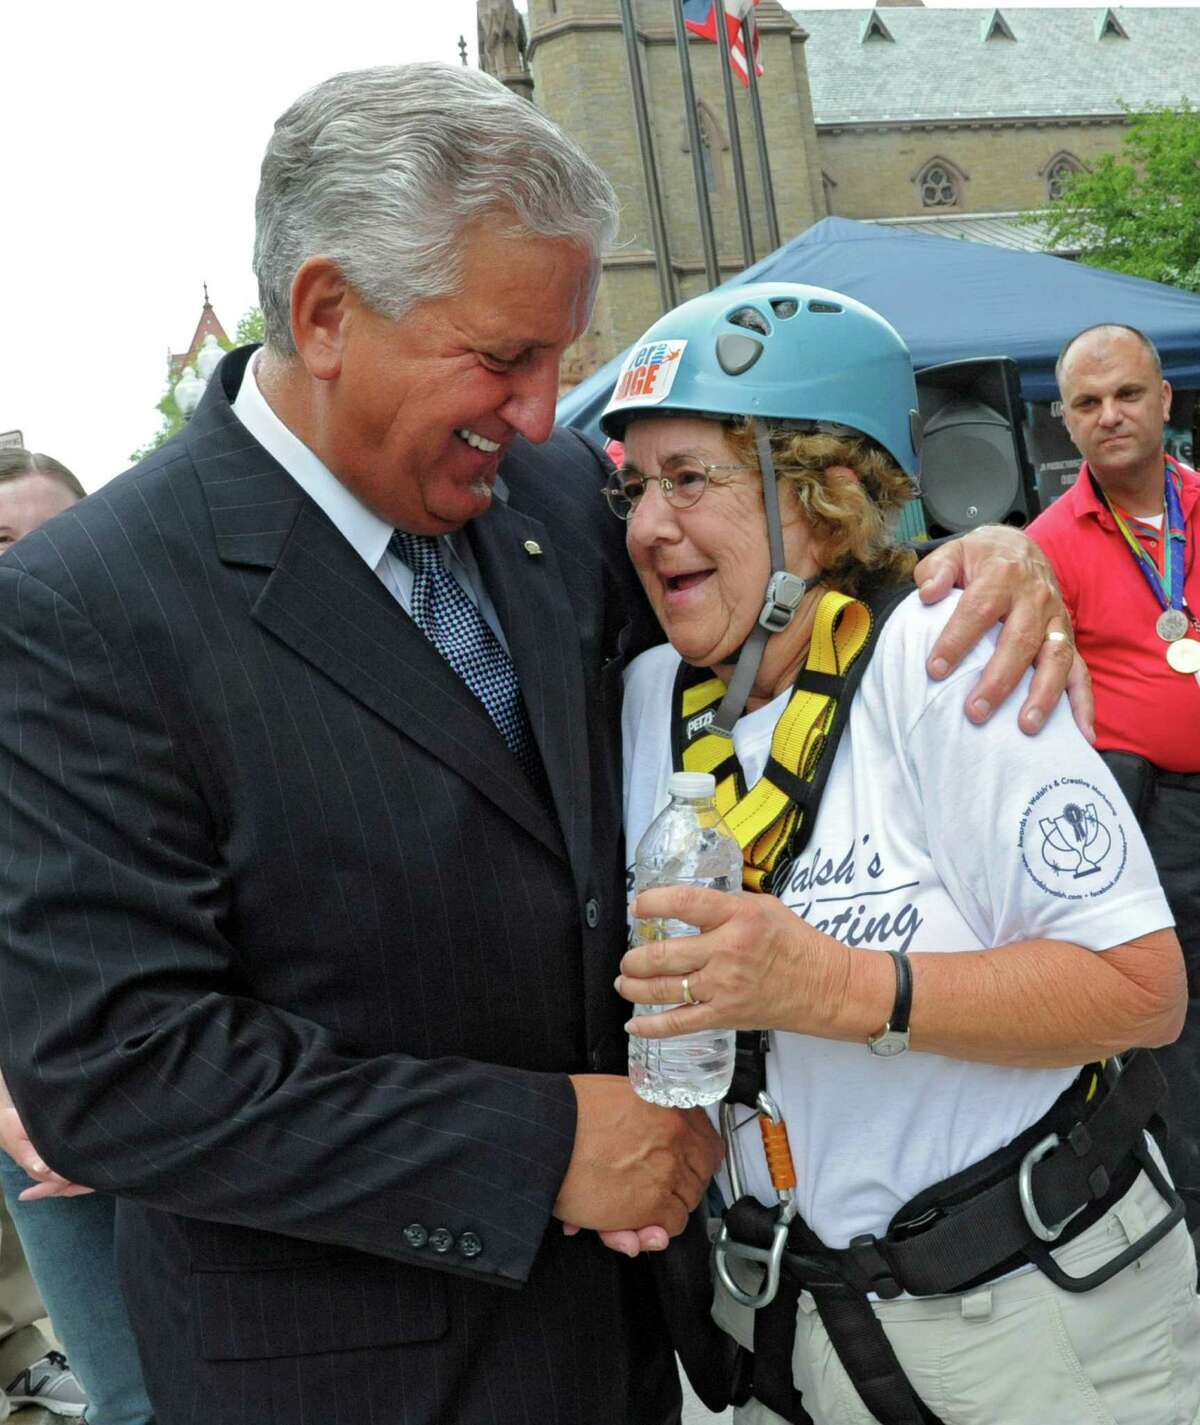 Albany Mayor Jerry Jennings congratulates 70-year-old Gail Wrieden of Latham after she rappelled down the 18 story side of Hotel Albany for the Over The Edge event to benefit the Special Olympics on Friday, Aug. 17, 2012 in Guilderland, N.Y. (Lori Van Buren / Times Union)